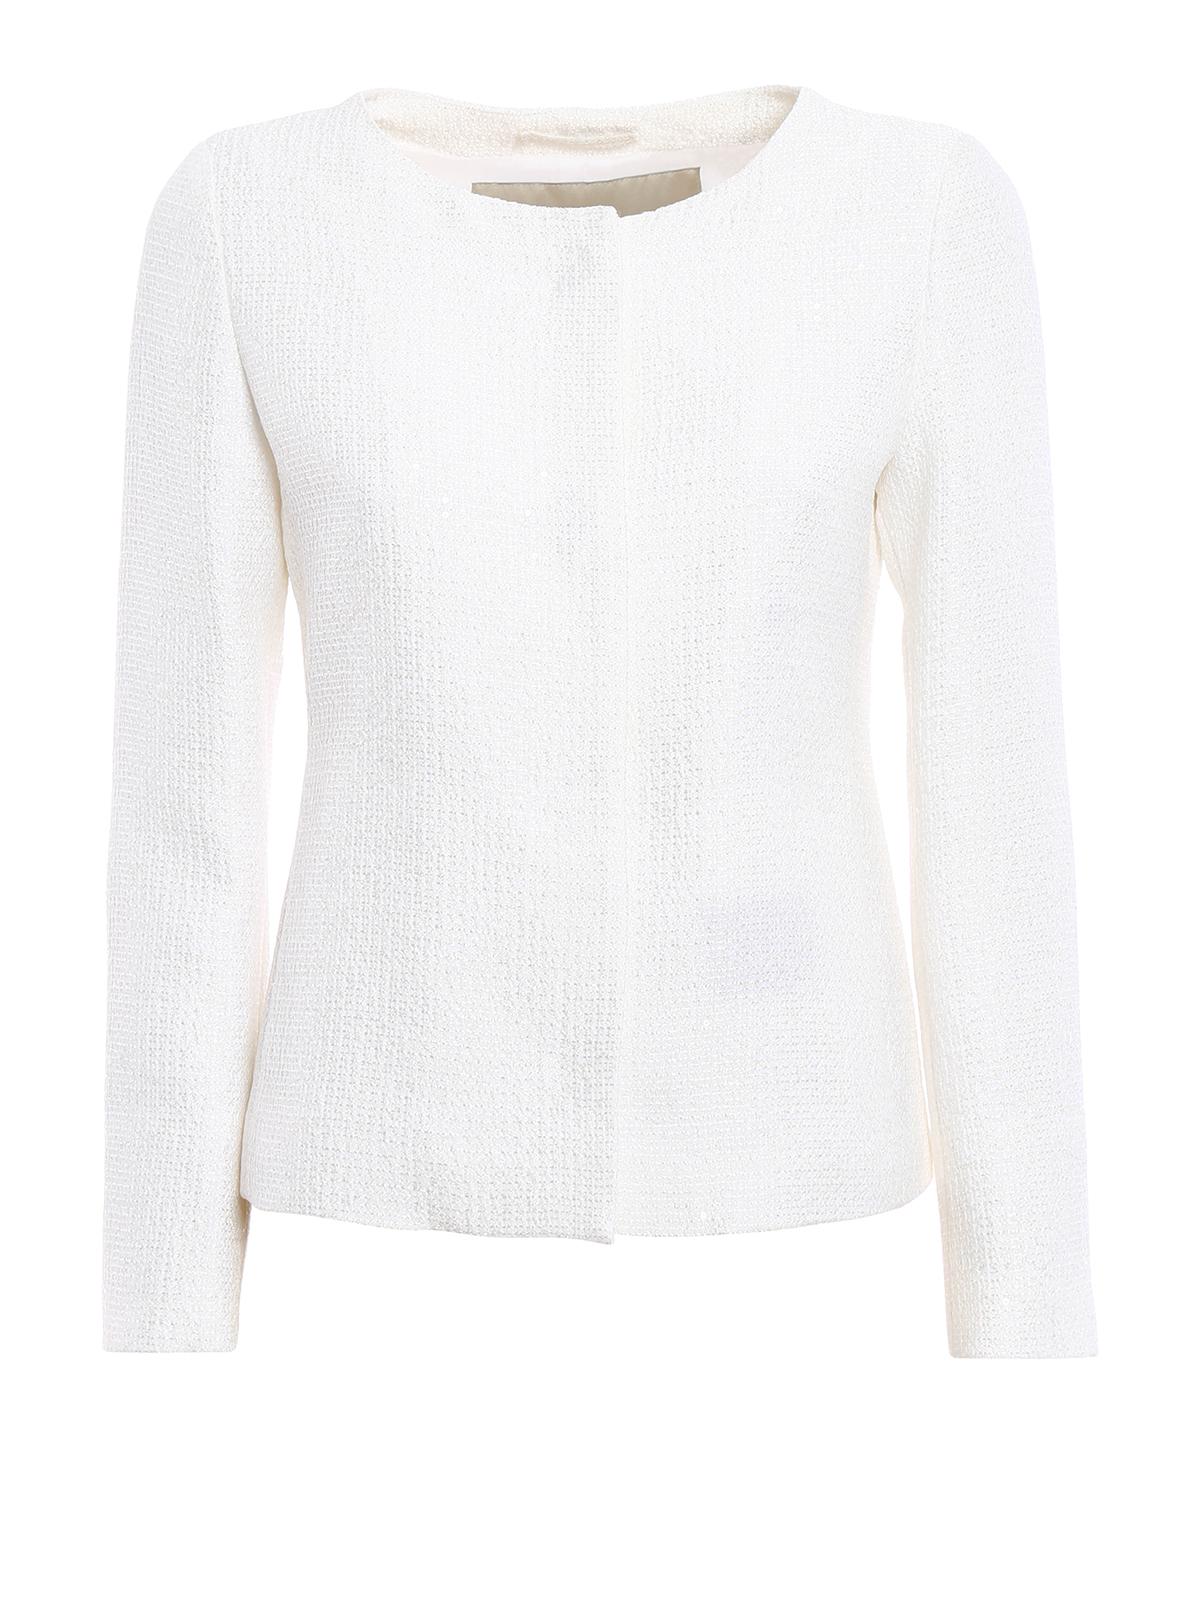 Herno Bright Sequin Tweed Jacket in White - Lyst